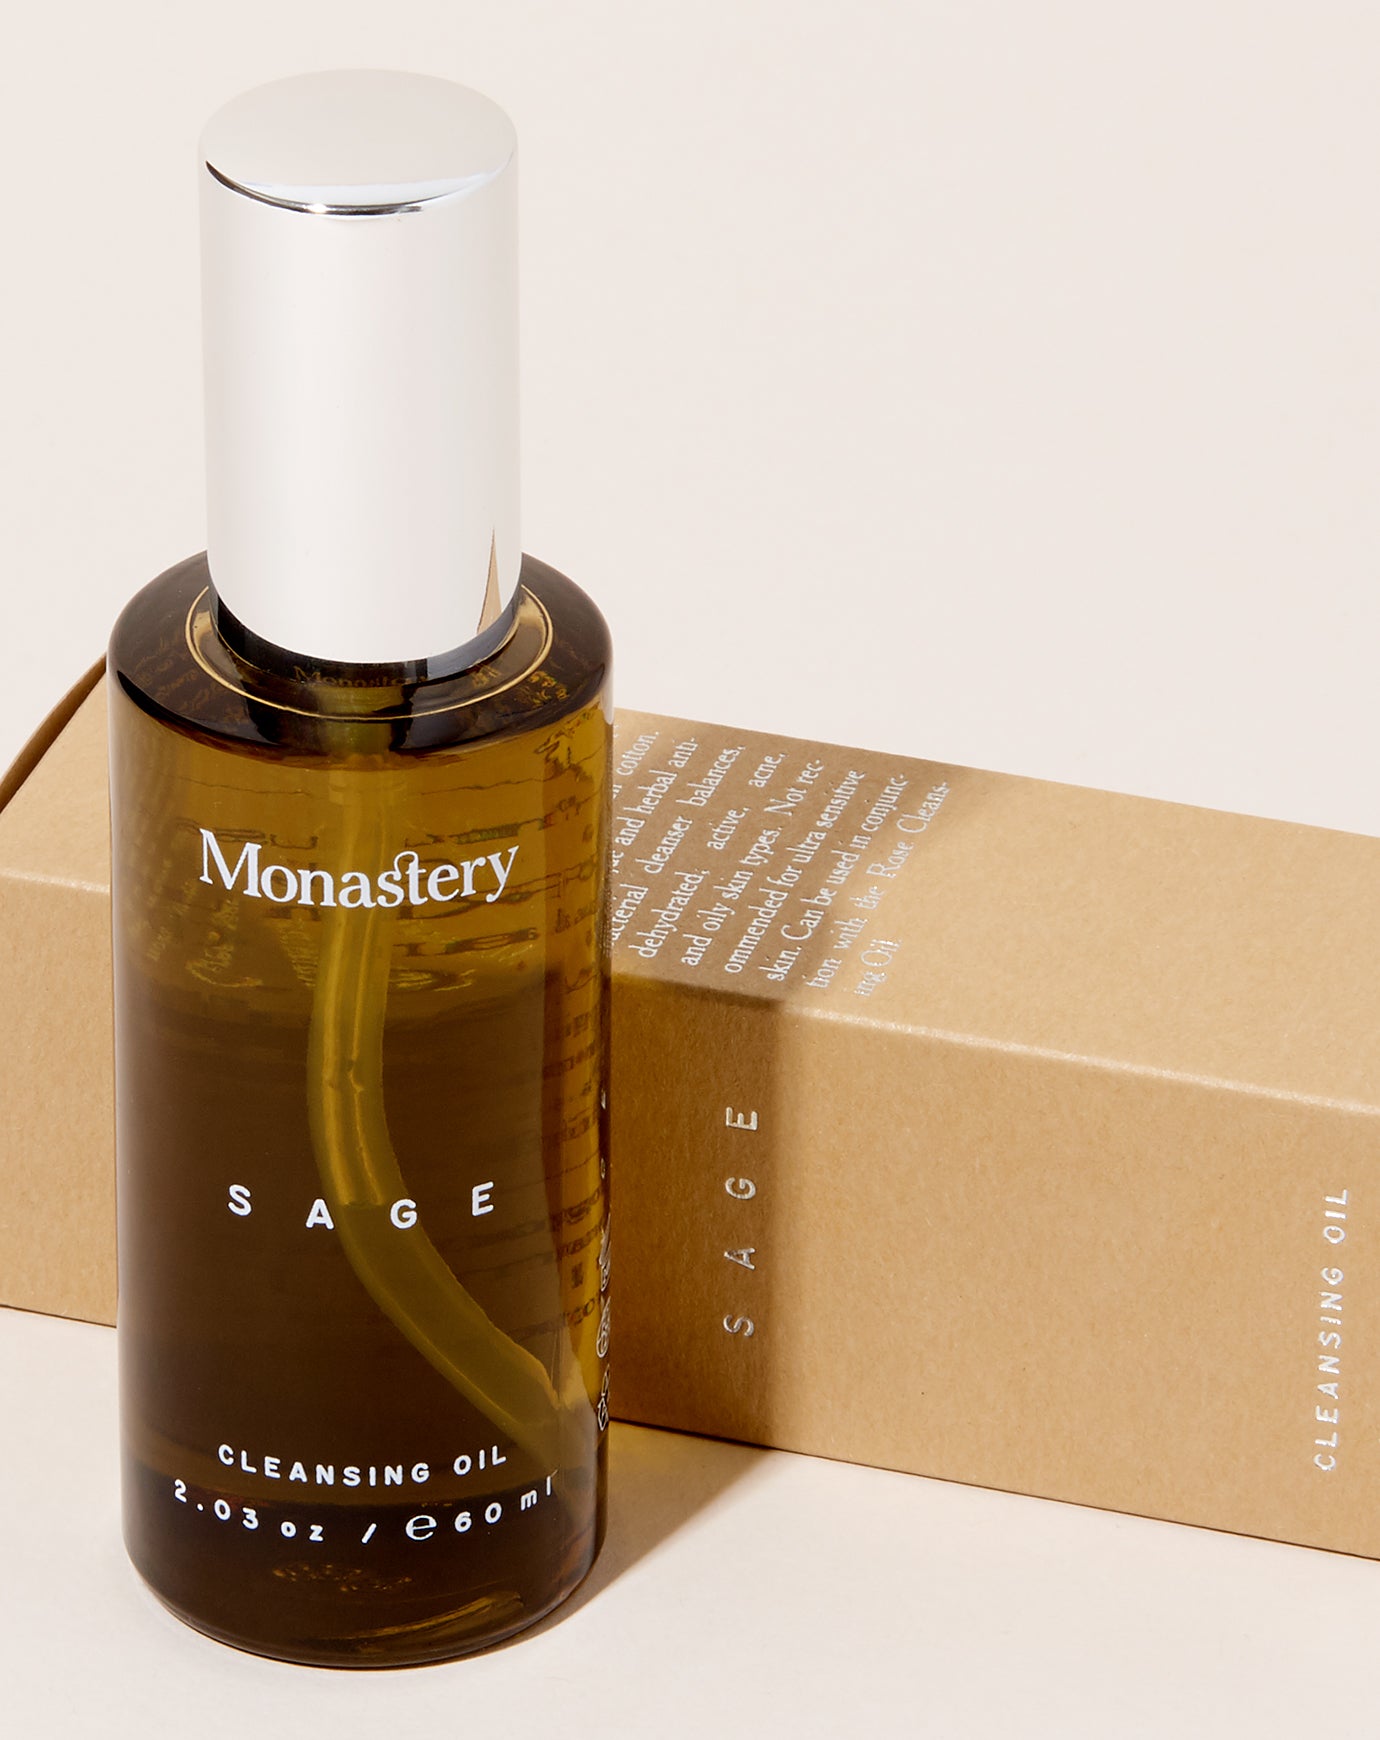 Monastery Sage Cleansing Oil